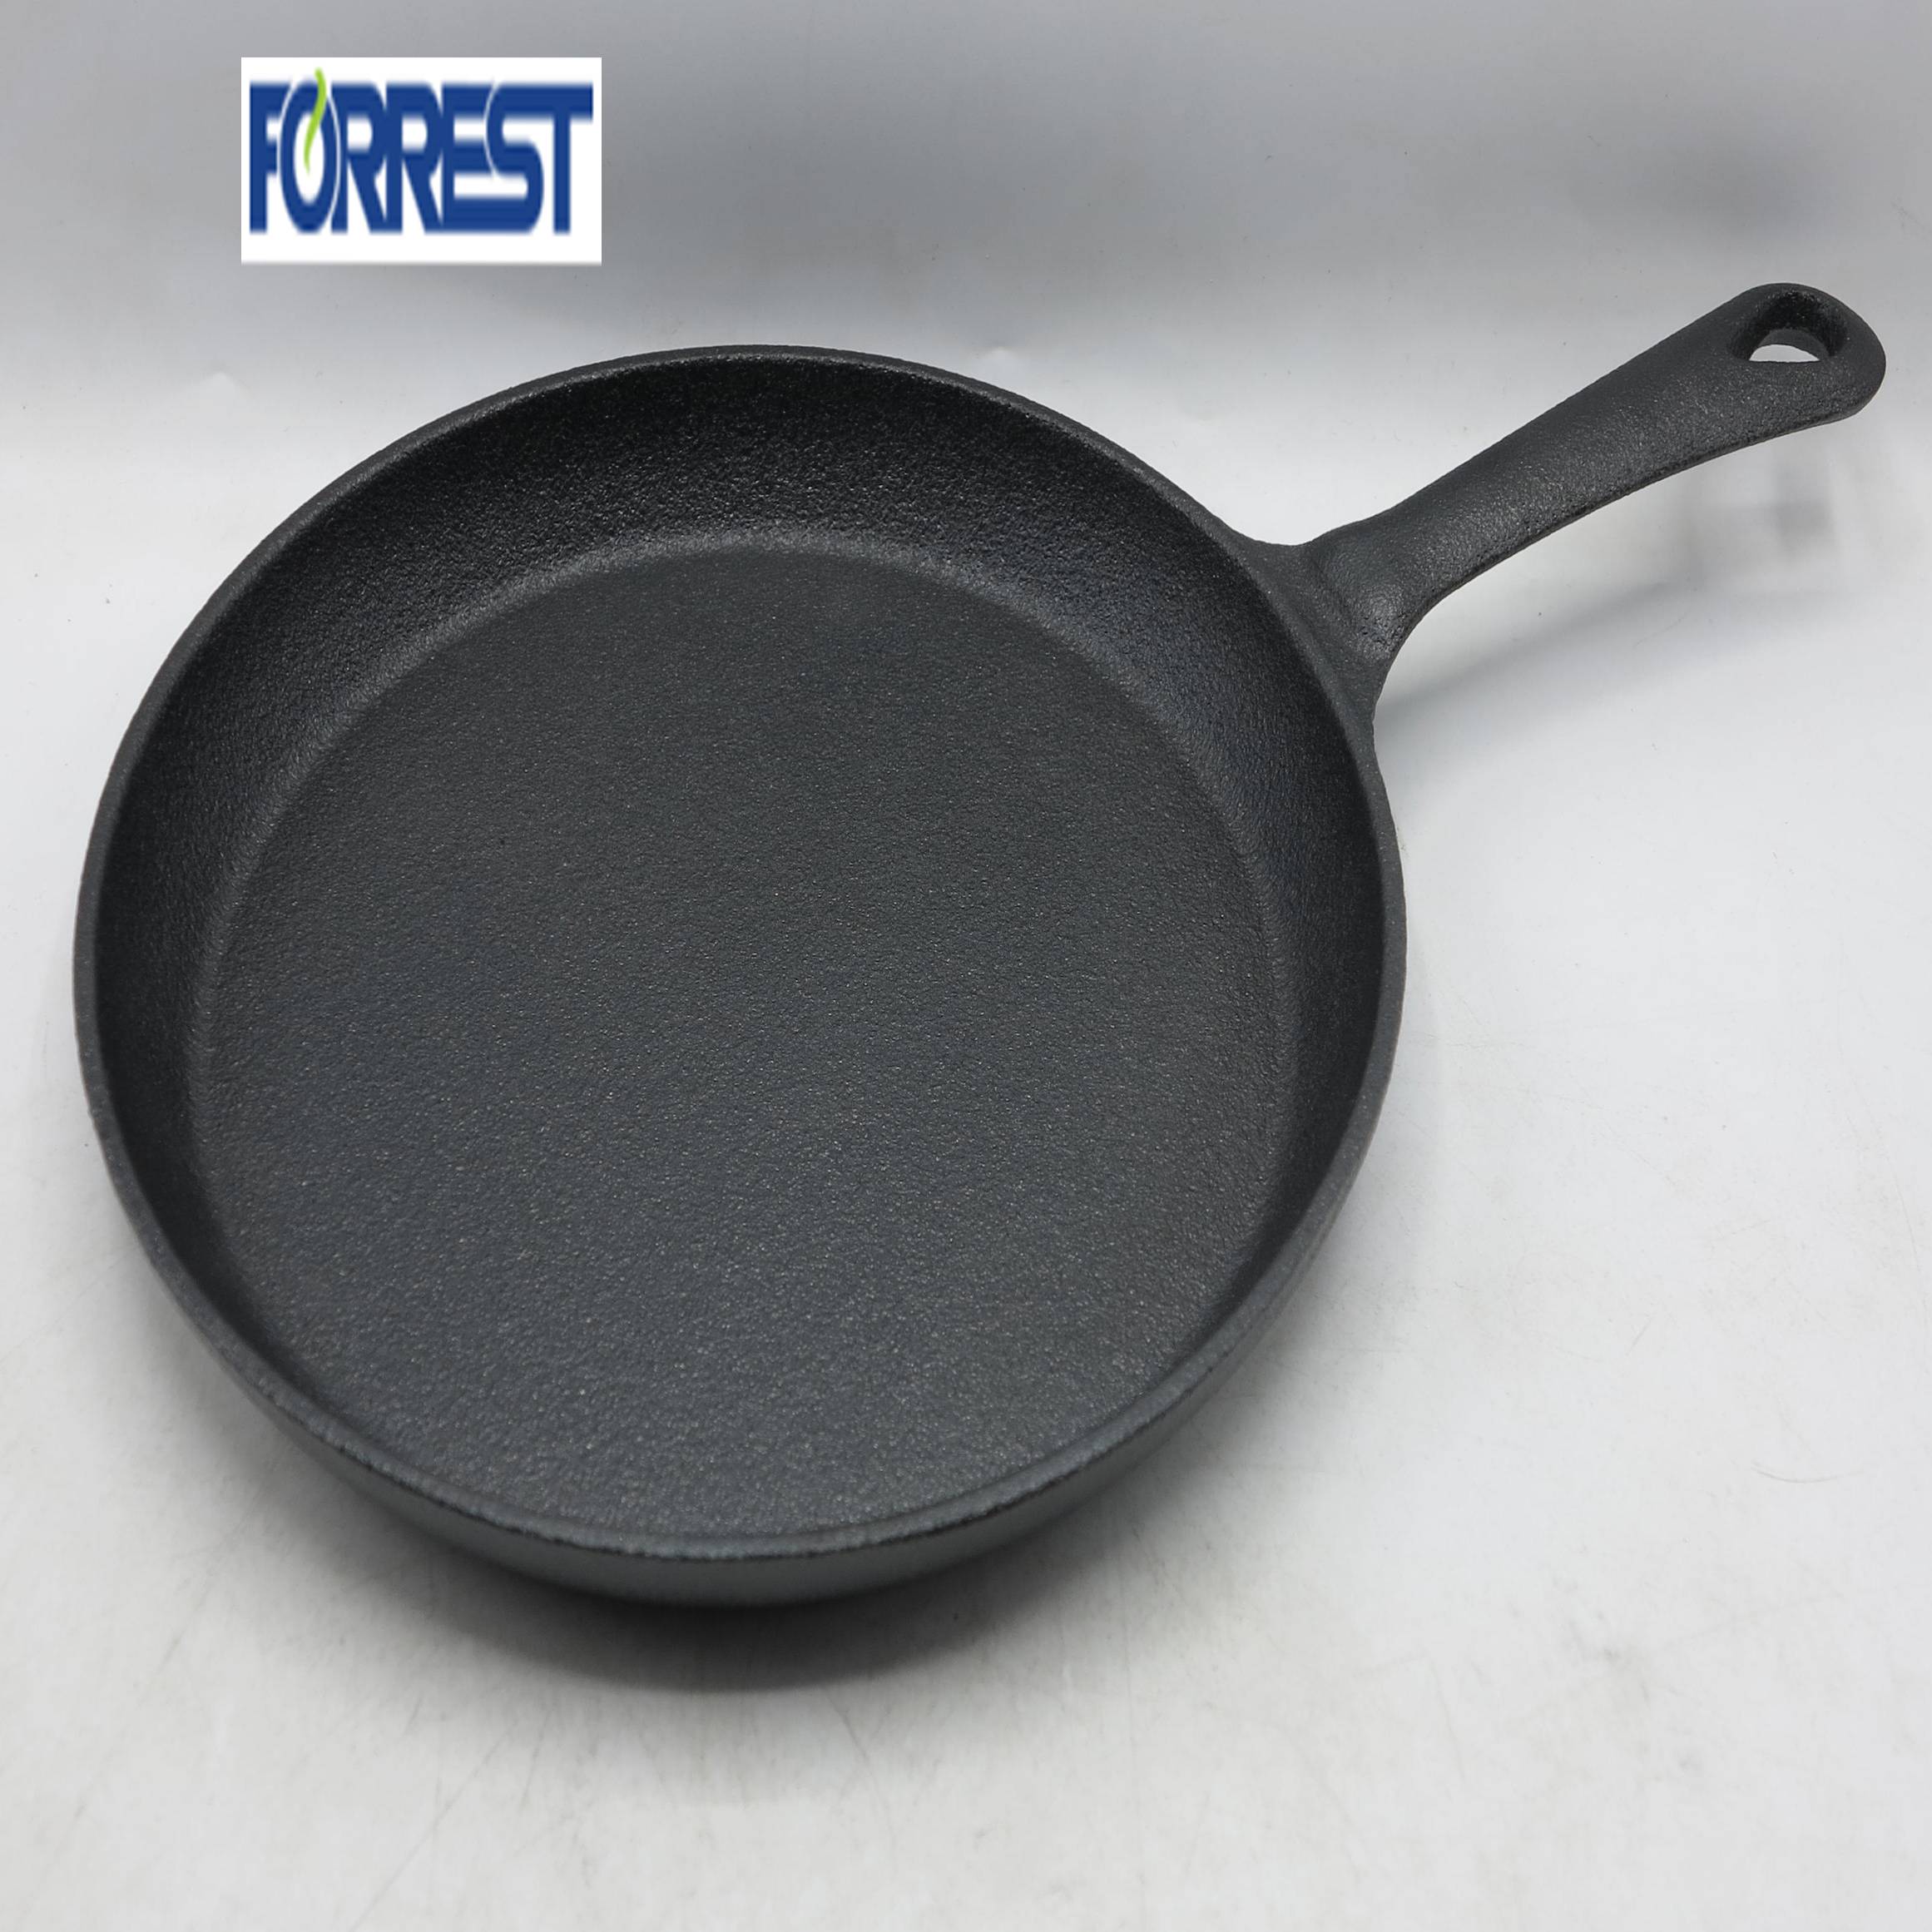 Preseasoned cast iron cookware Round 20cm frying pan FDA approved